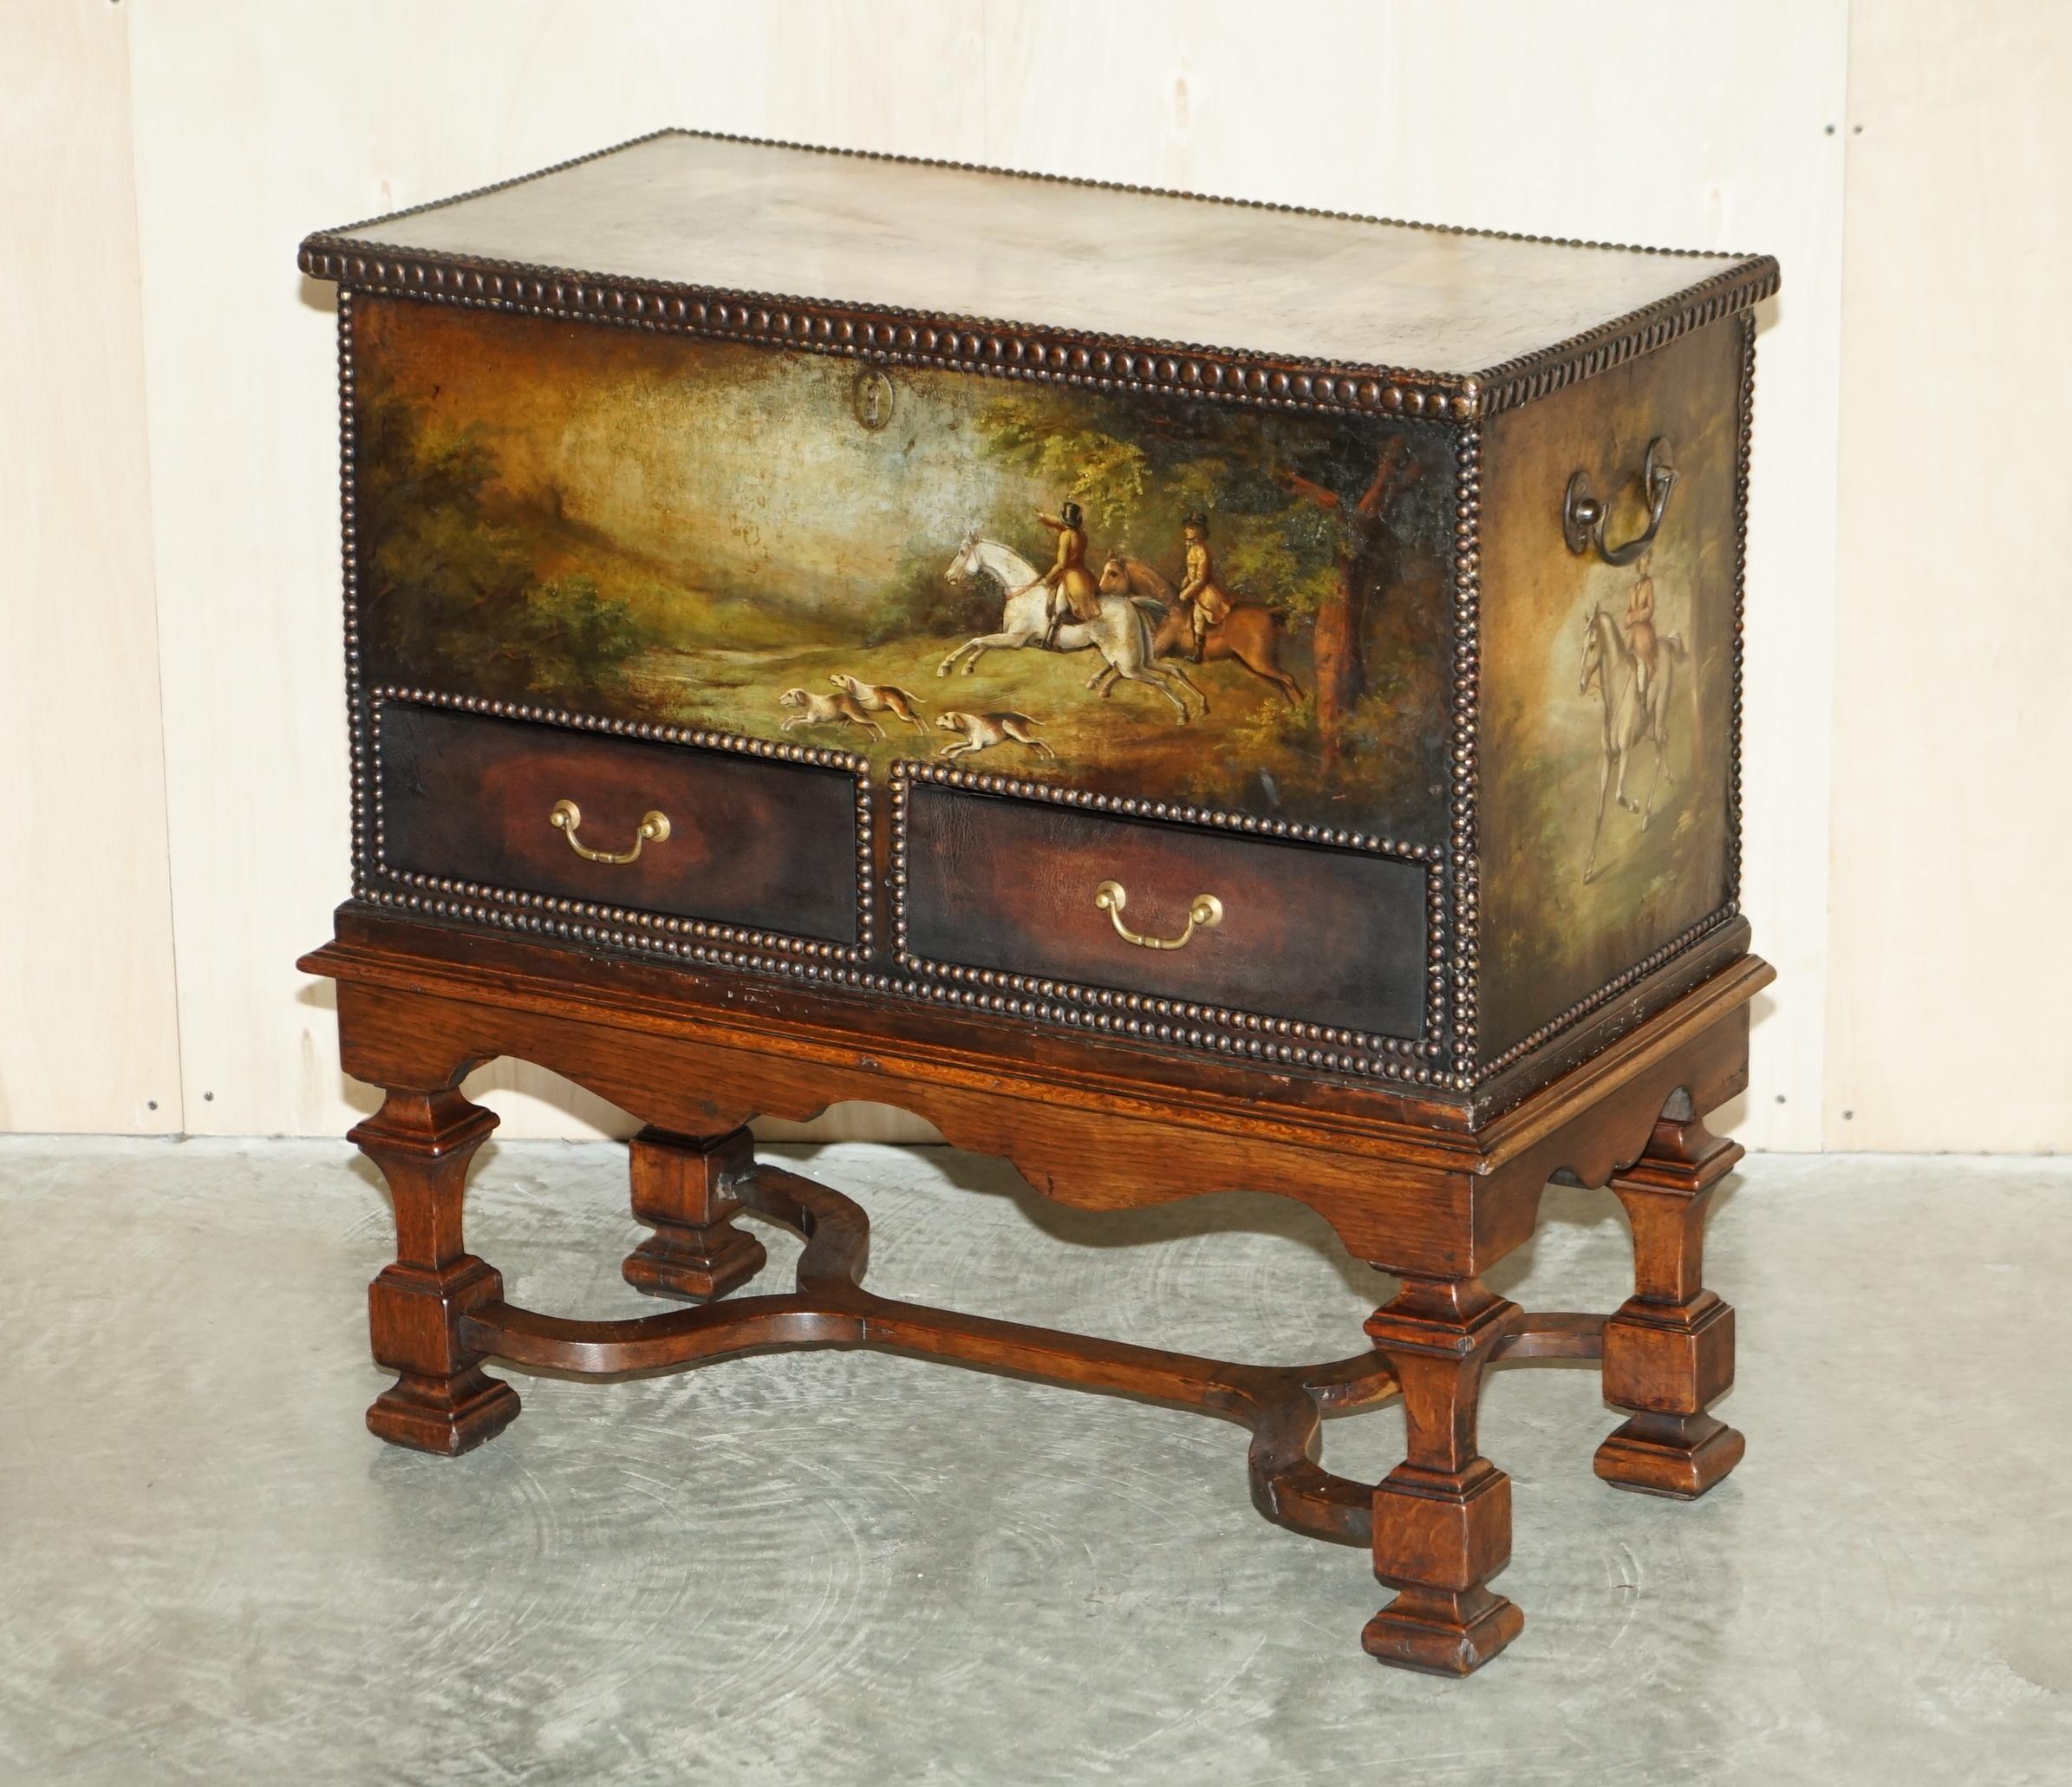 We are delighted to offer for sale this extremely important, museum quality, hand painted leather clad trunk on stand depicting rural scenes with horses

Where to begin, firstly I don’t want to sell this, it is without a doubt the most stunning